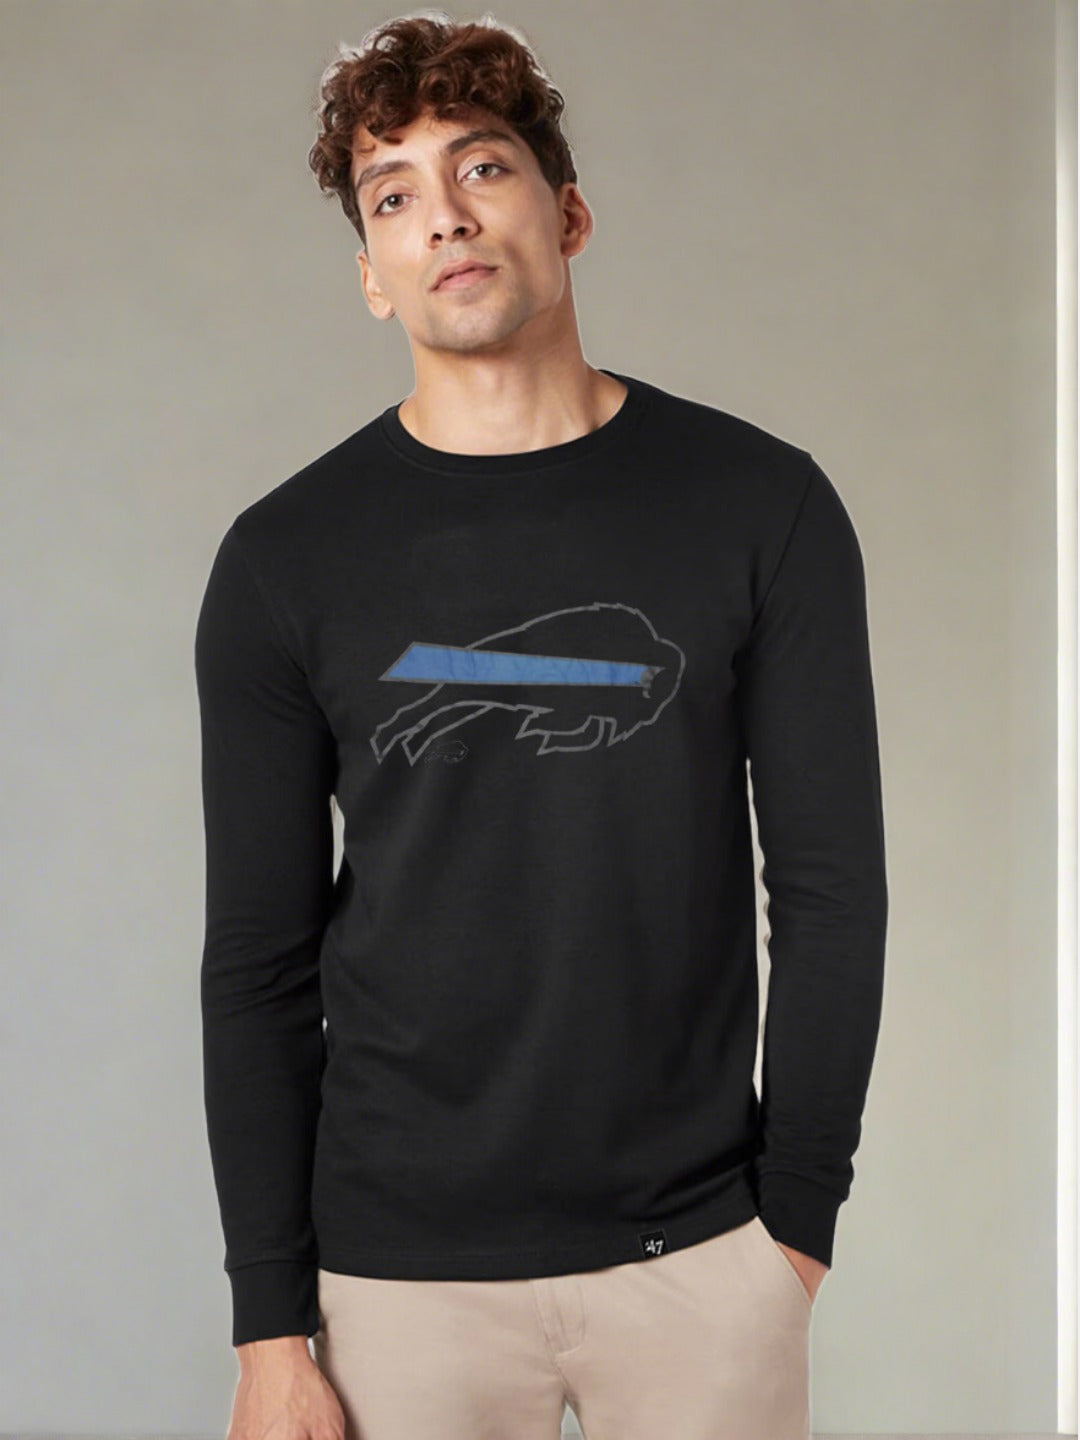 47 Single Jersey Crew Neck Long Sleeve Shirt For Men-Black with Print-SP2027